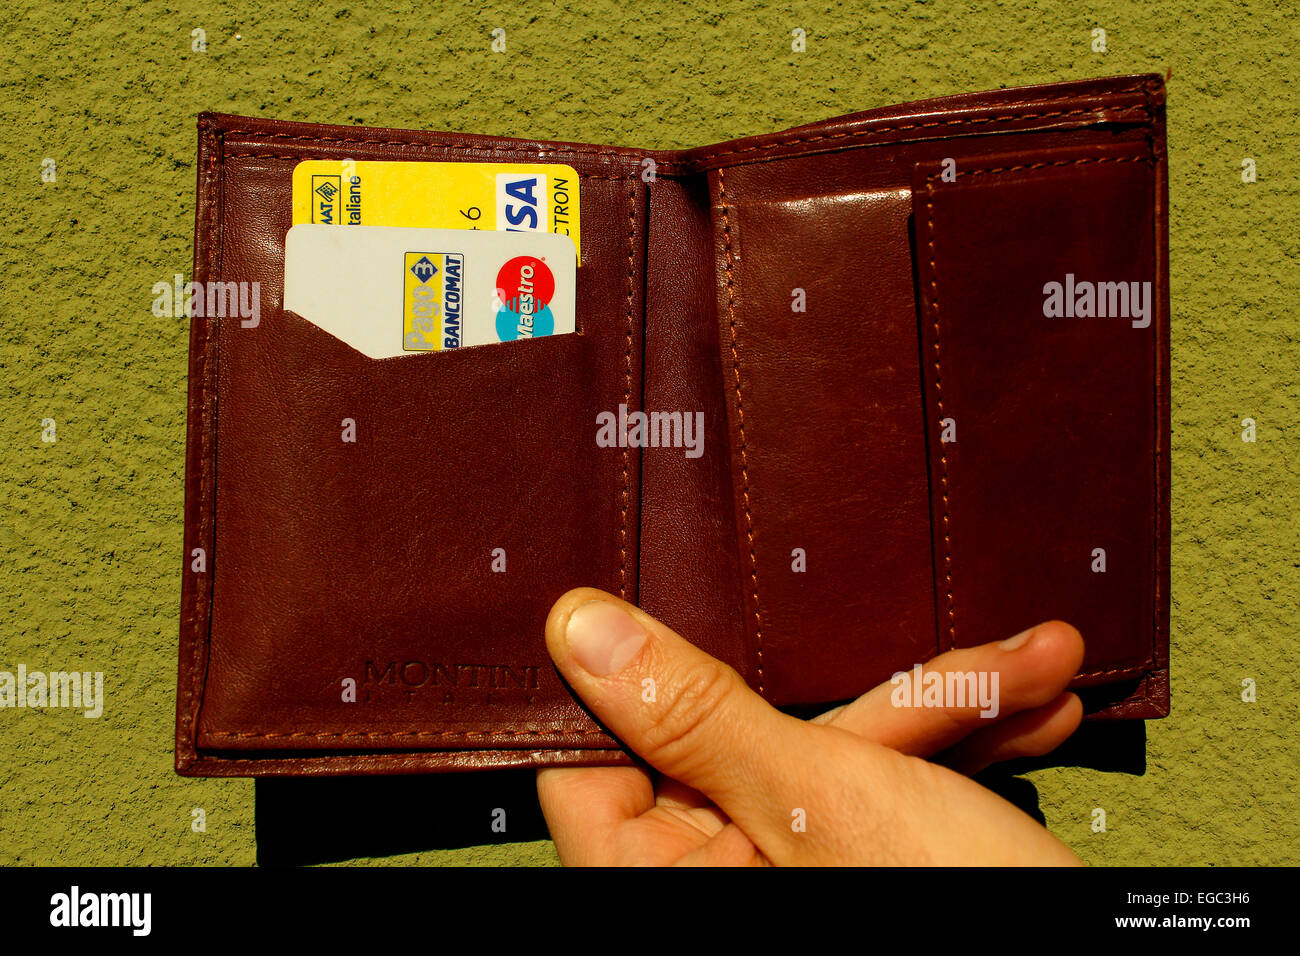 Wallet with credit cards Stock Photo